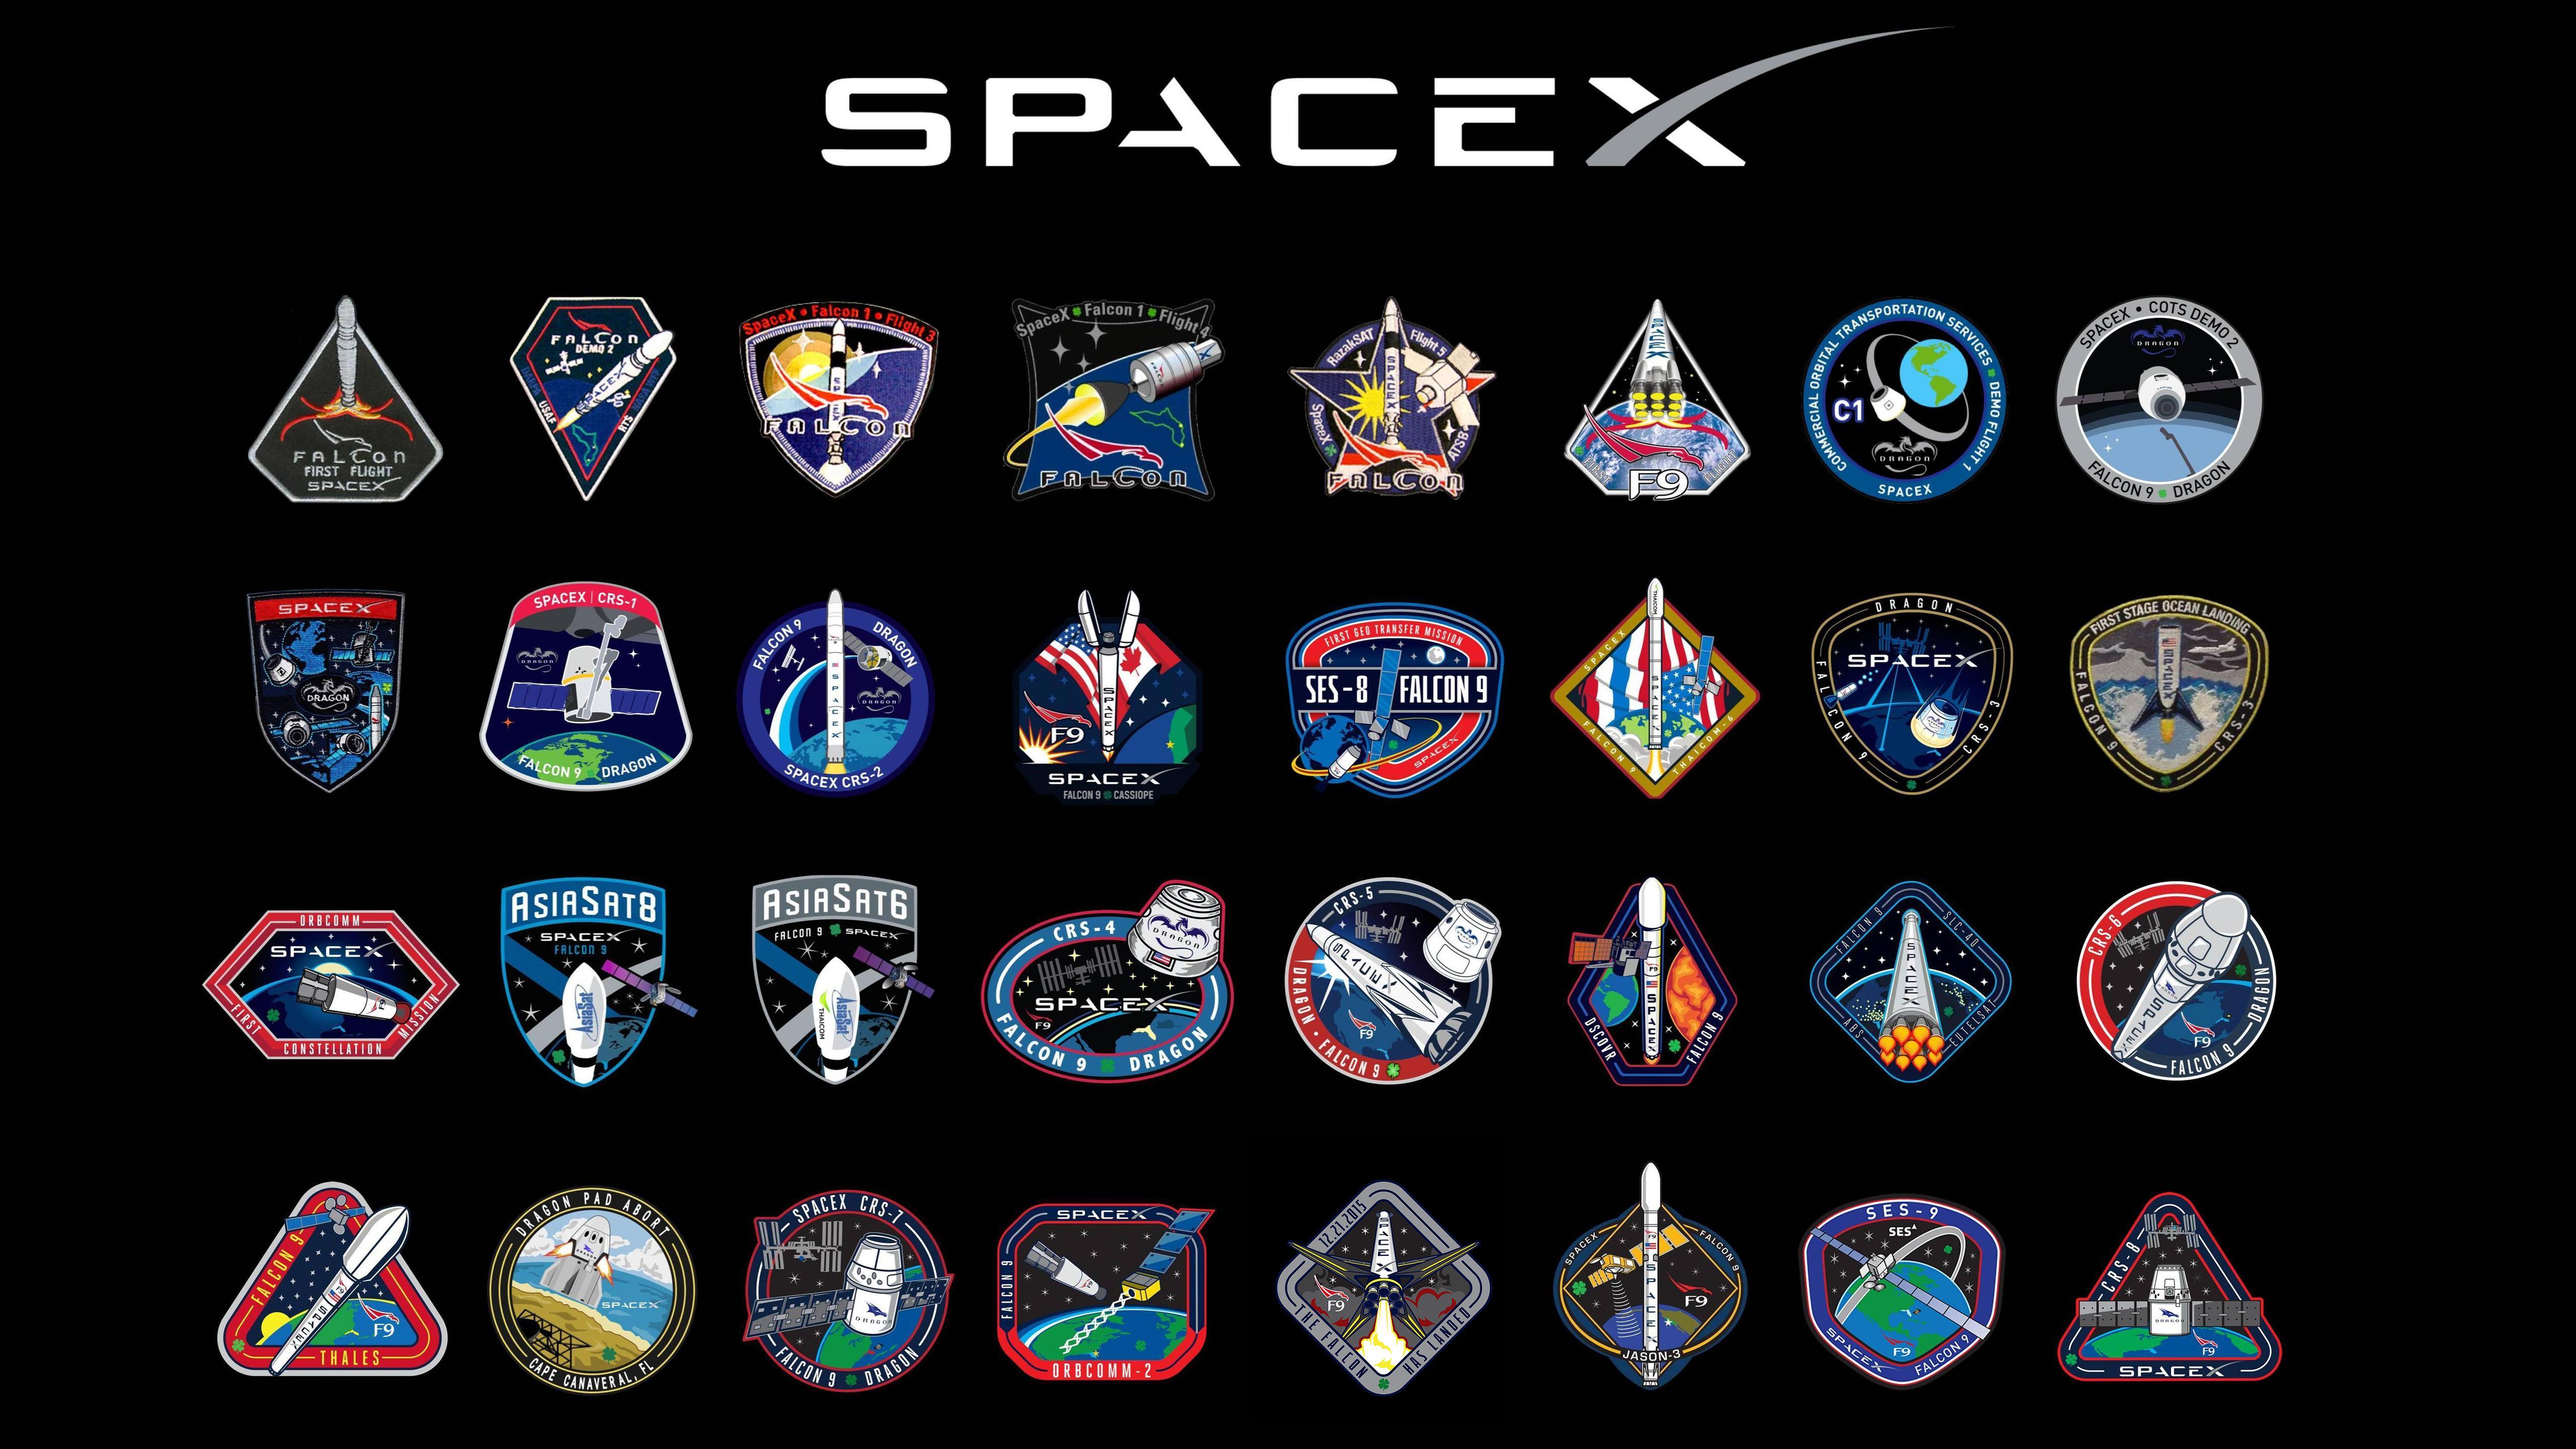 SpaceX F9 Logo - I Updated U Its_Enough's Wallpaper Of Mission Patches To Include